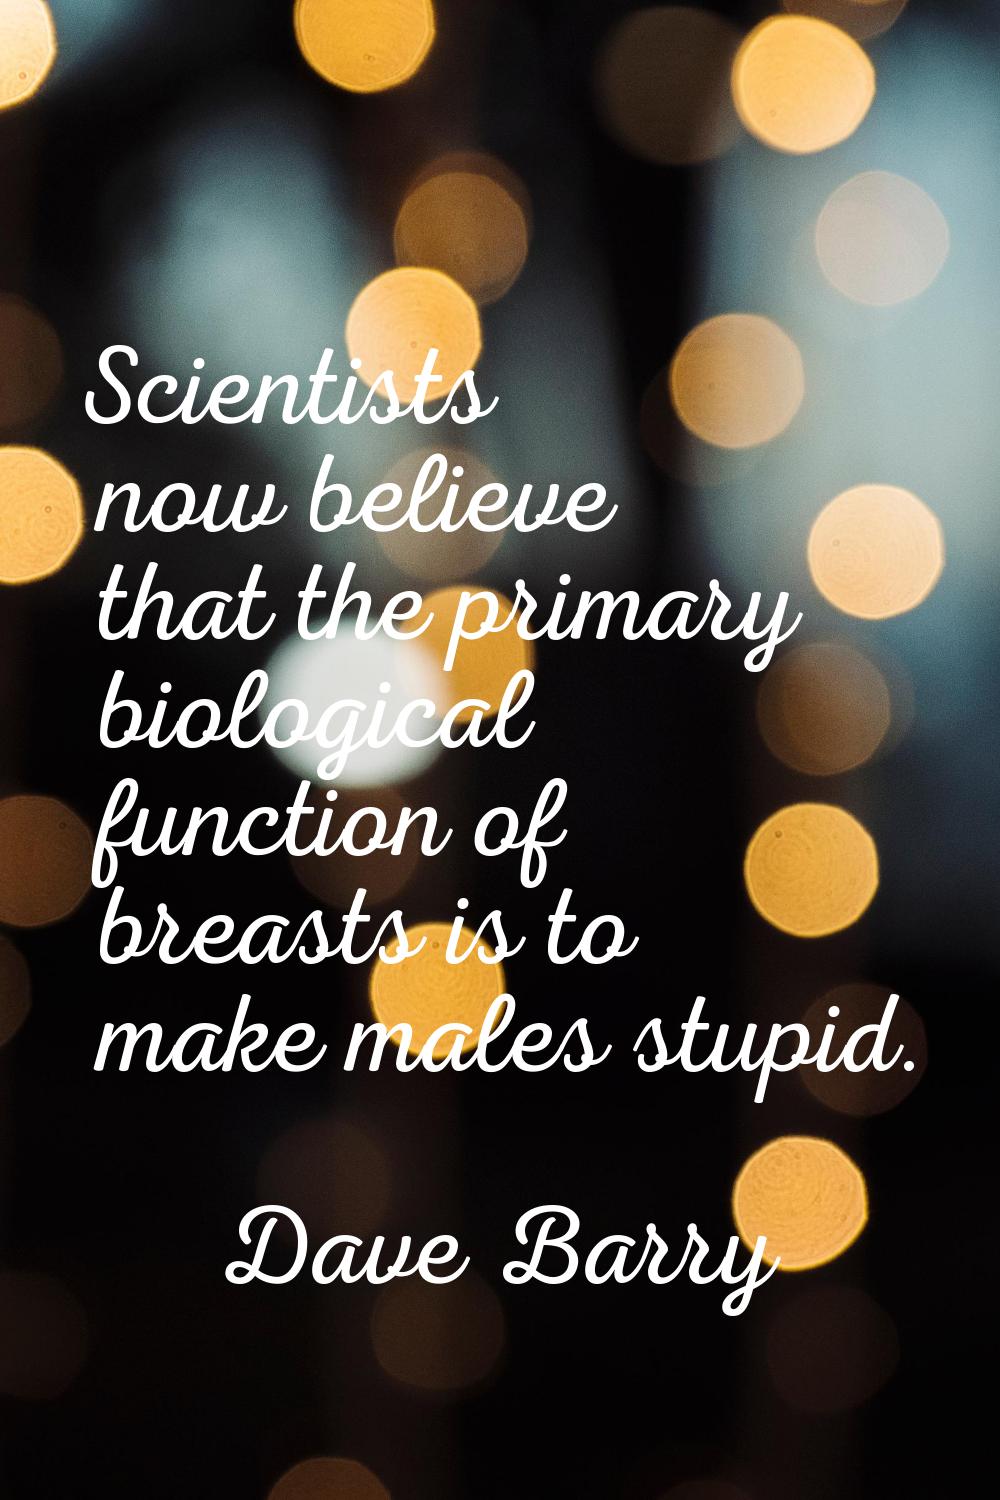 Scientists now believe that the primary biological function of breasts is to make males stupid.